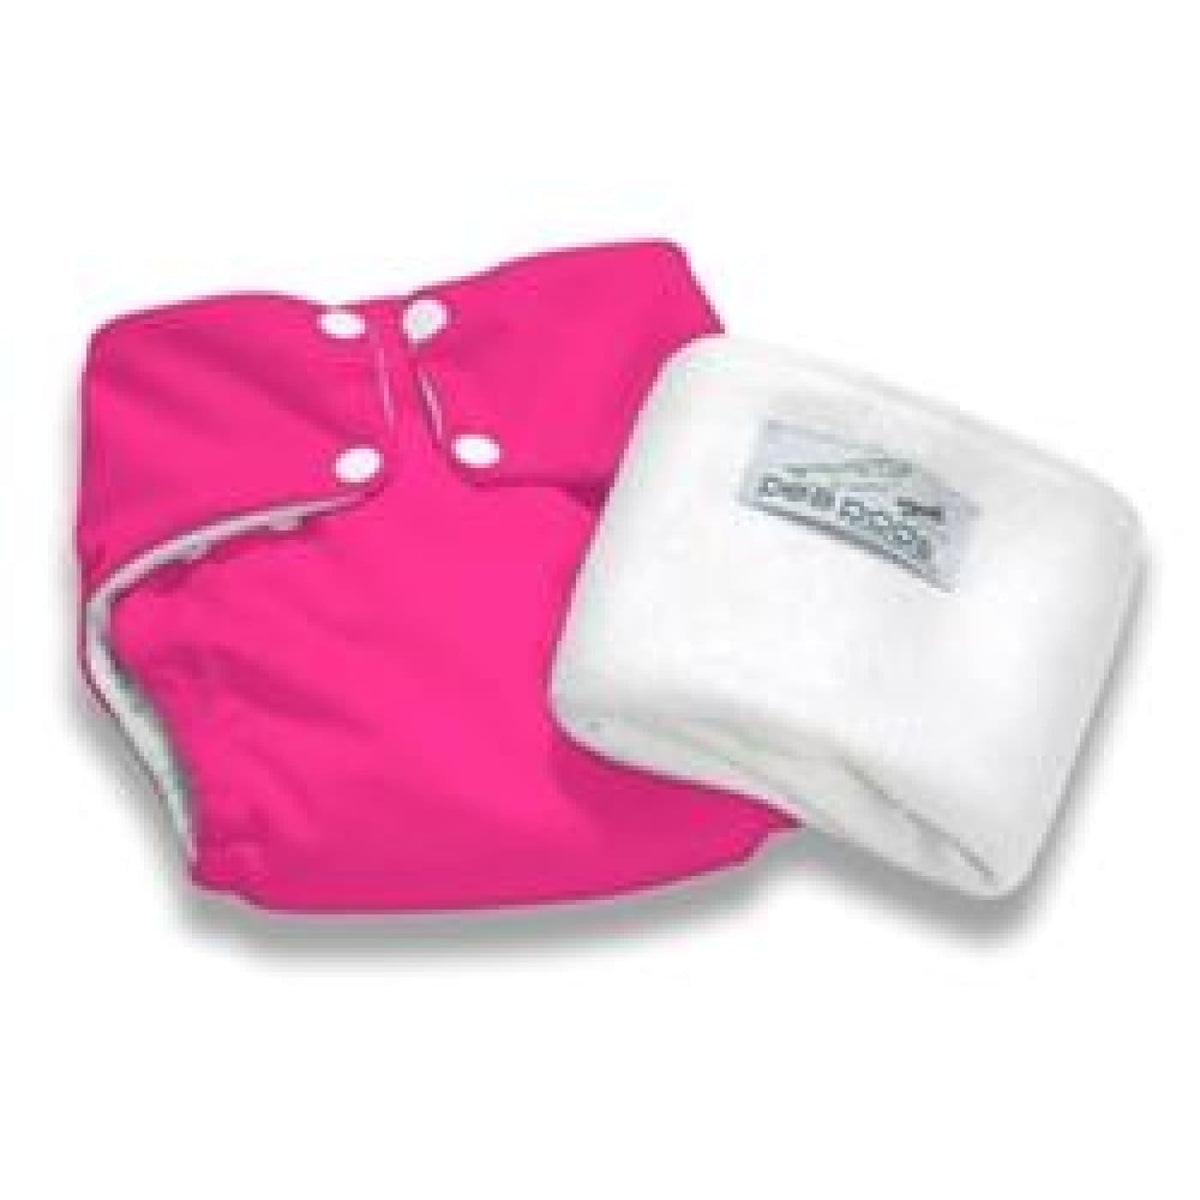 Pea Pods One Size Fits All Nappy - Hot Pink - BATHTIME &amp; CHANGING - NAPPIES/WIPES/ACC ECO RANGE